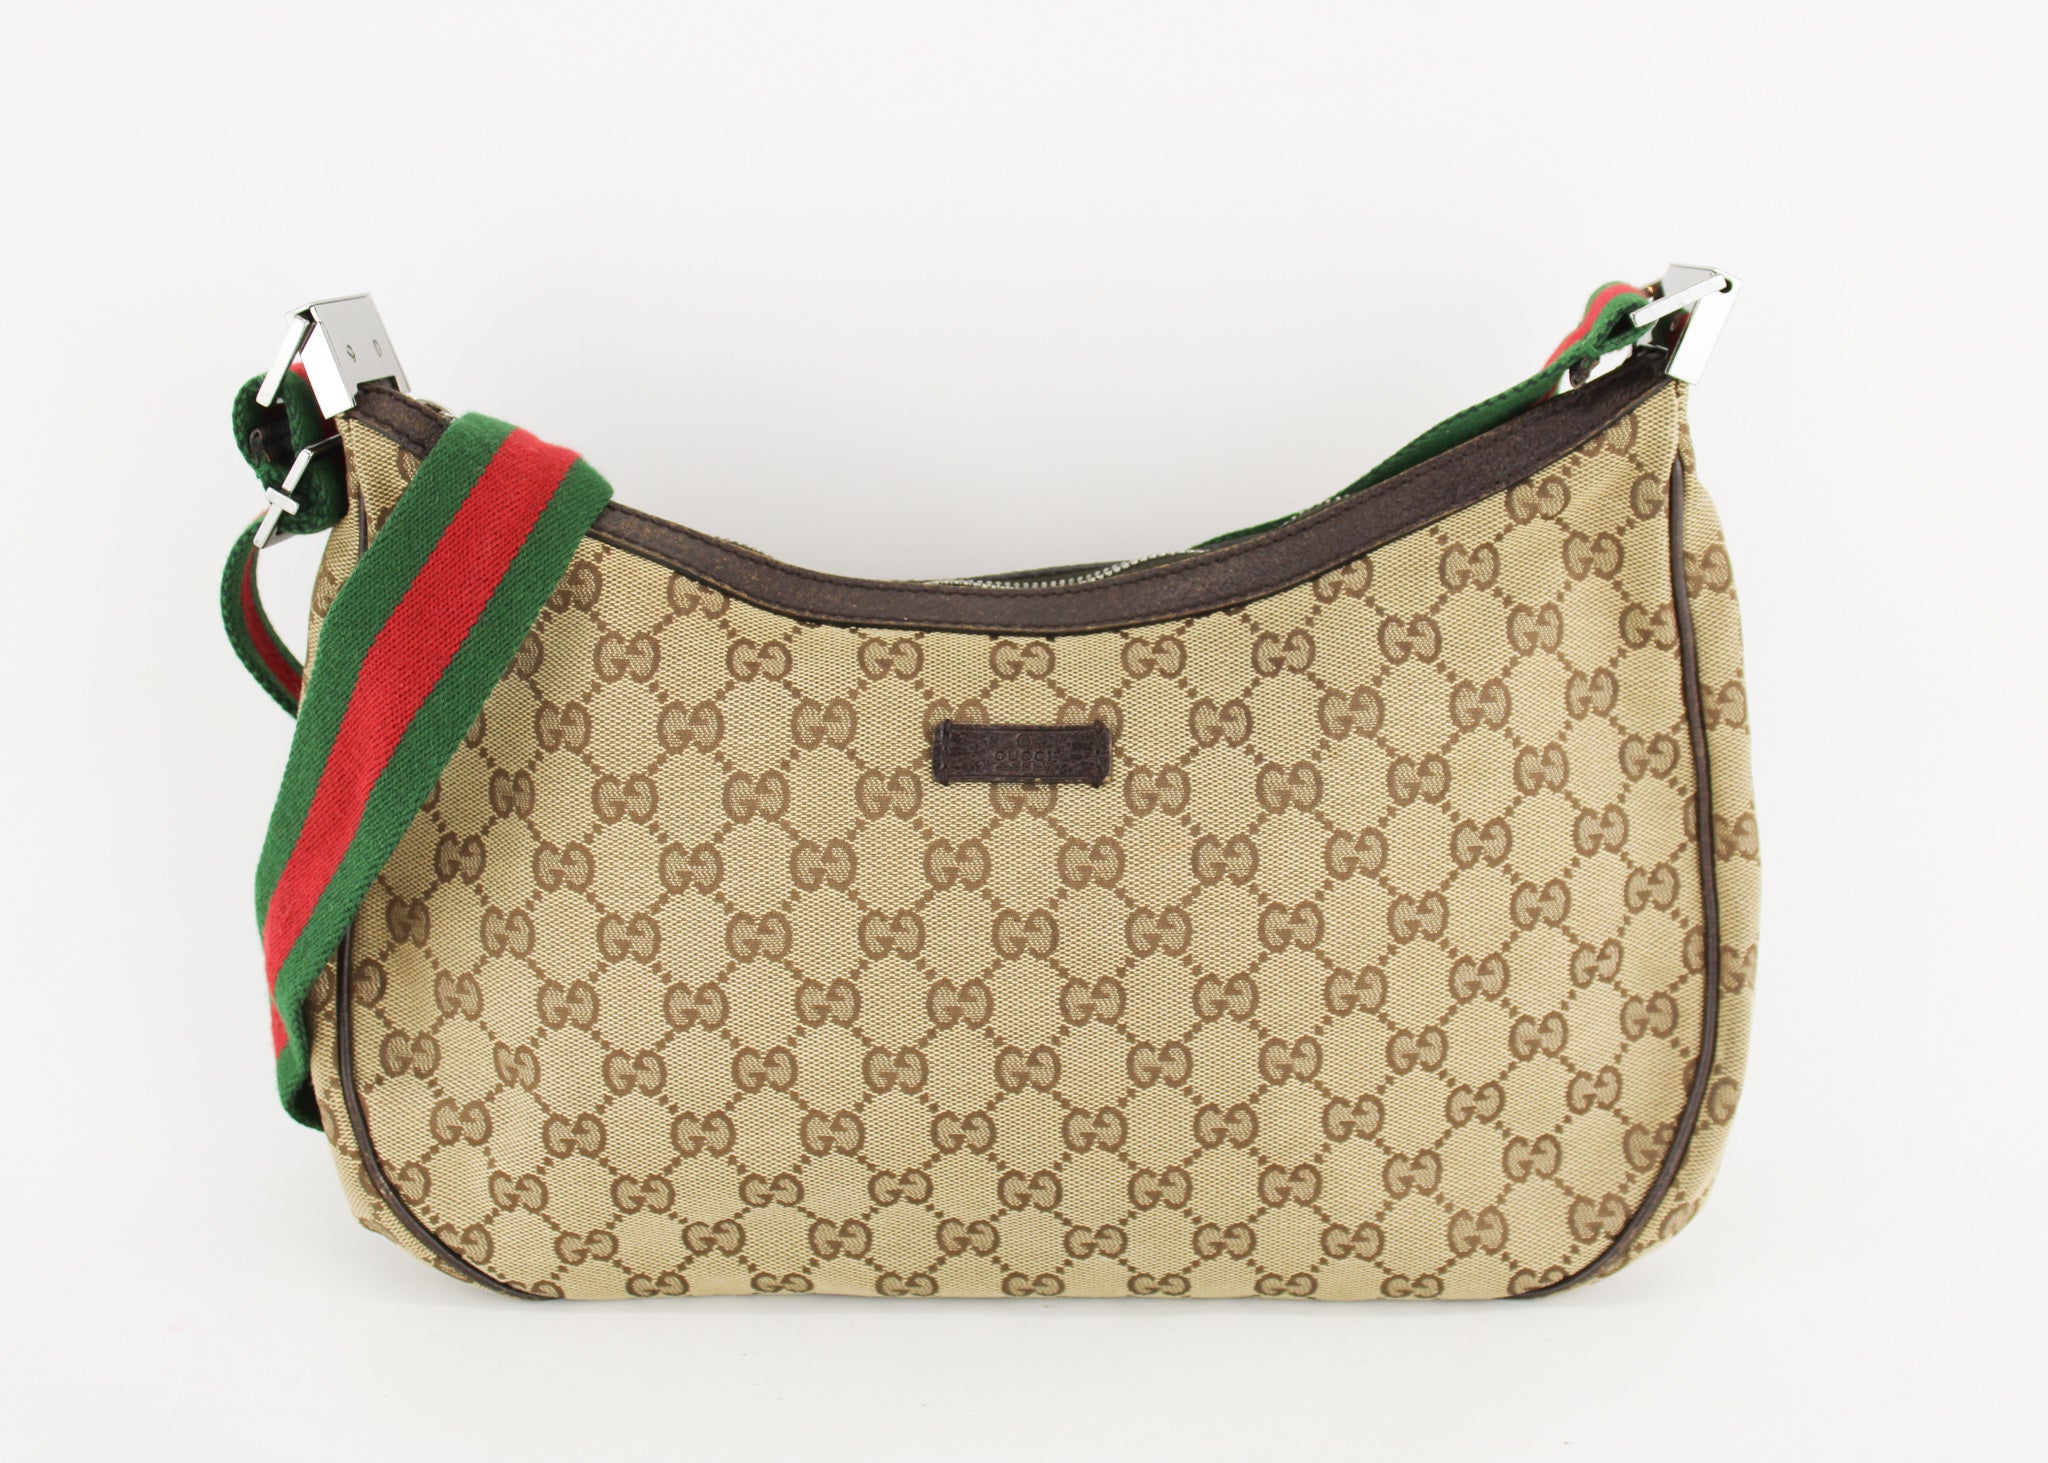 Authenticated Used Gucci Shoulder Bag Black 122790 Canvas Leather GUCCI  Women's Crossbody GG 